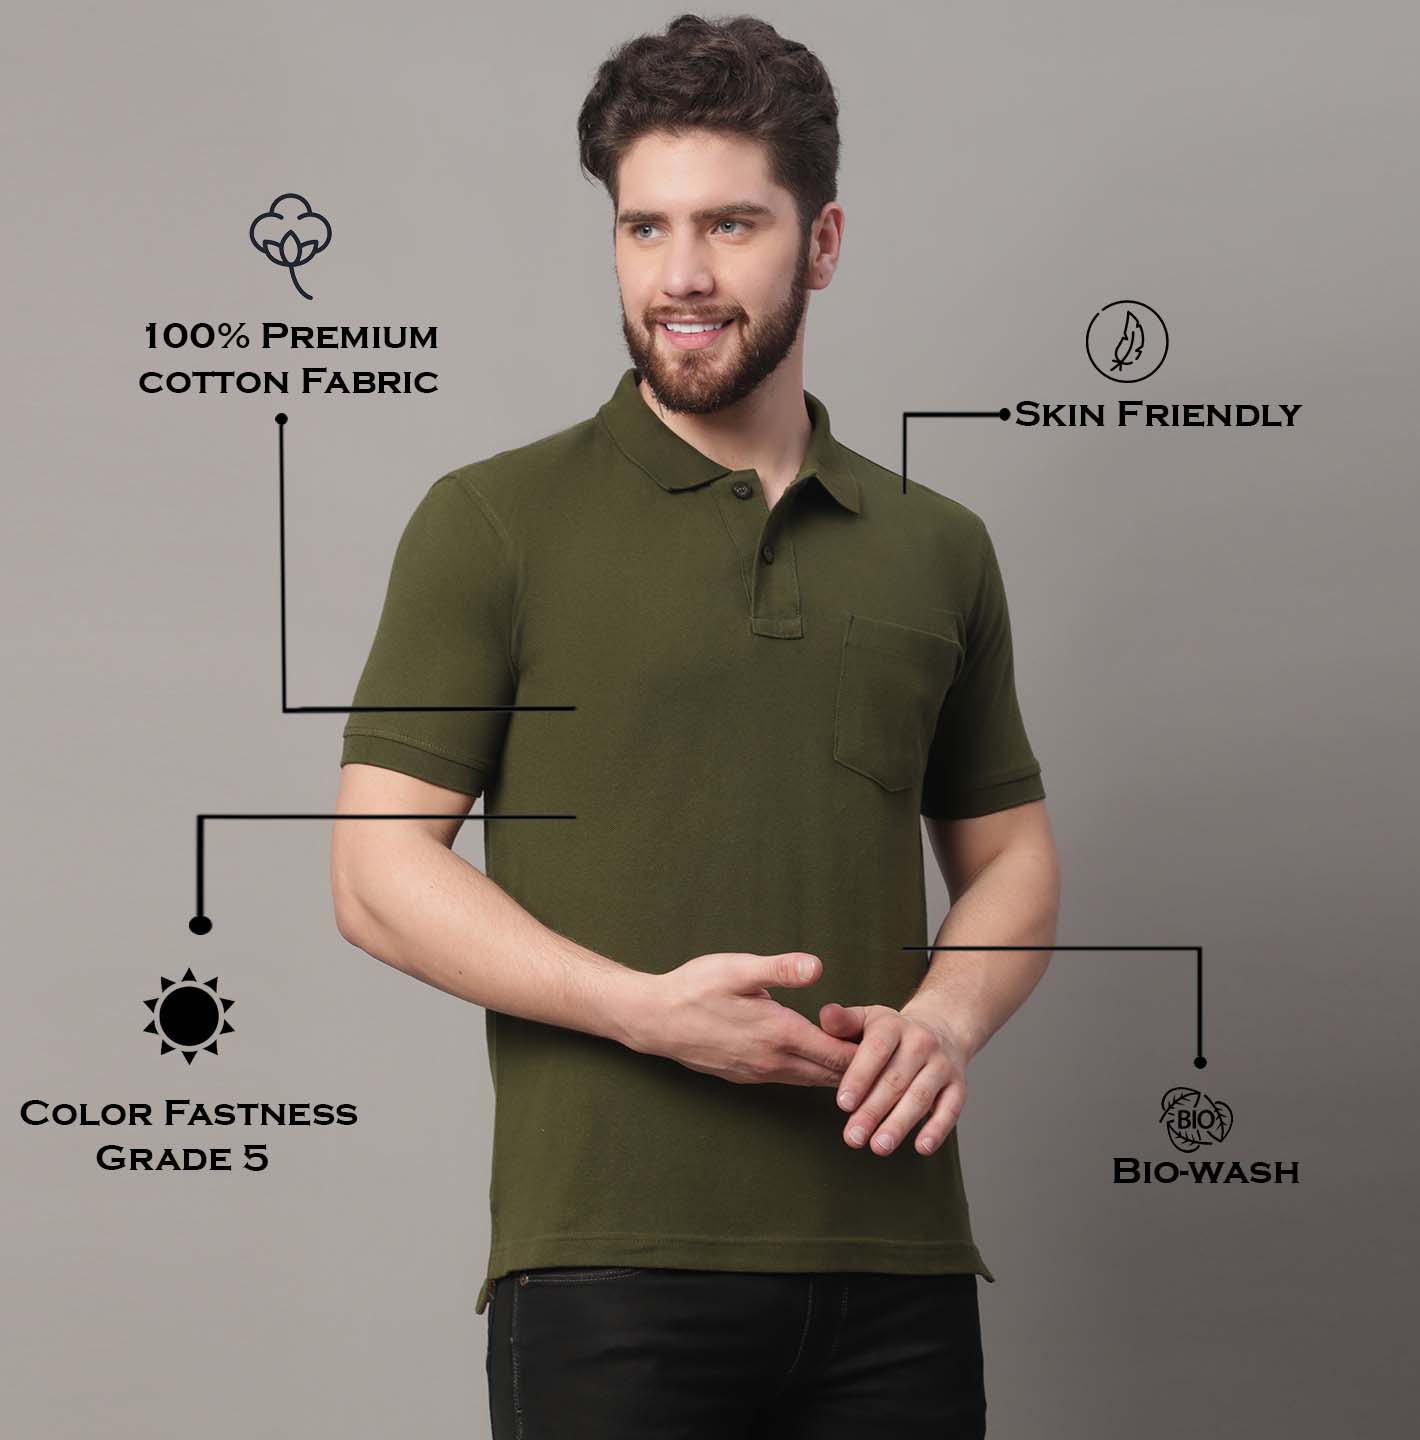 Men's Half Sleeves Solid Polo T-shirt - Friskers